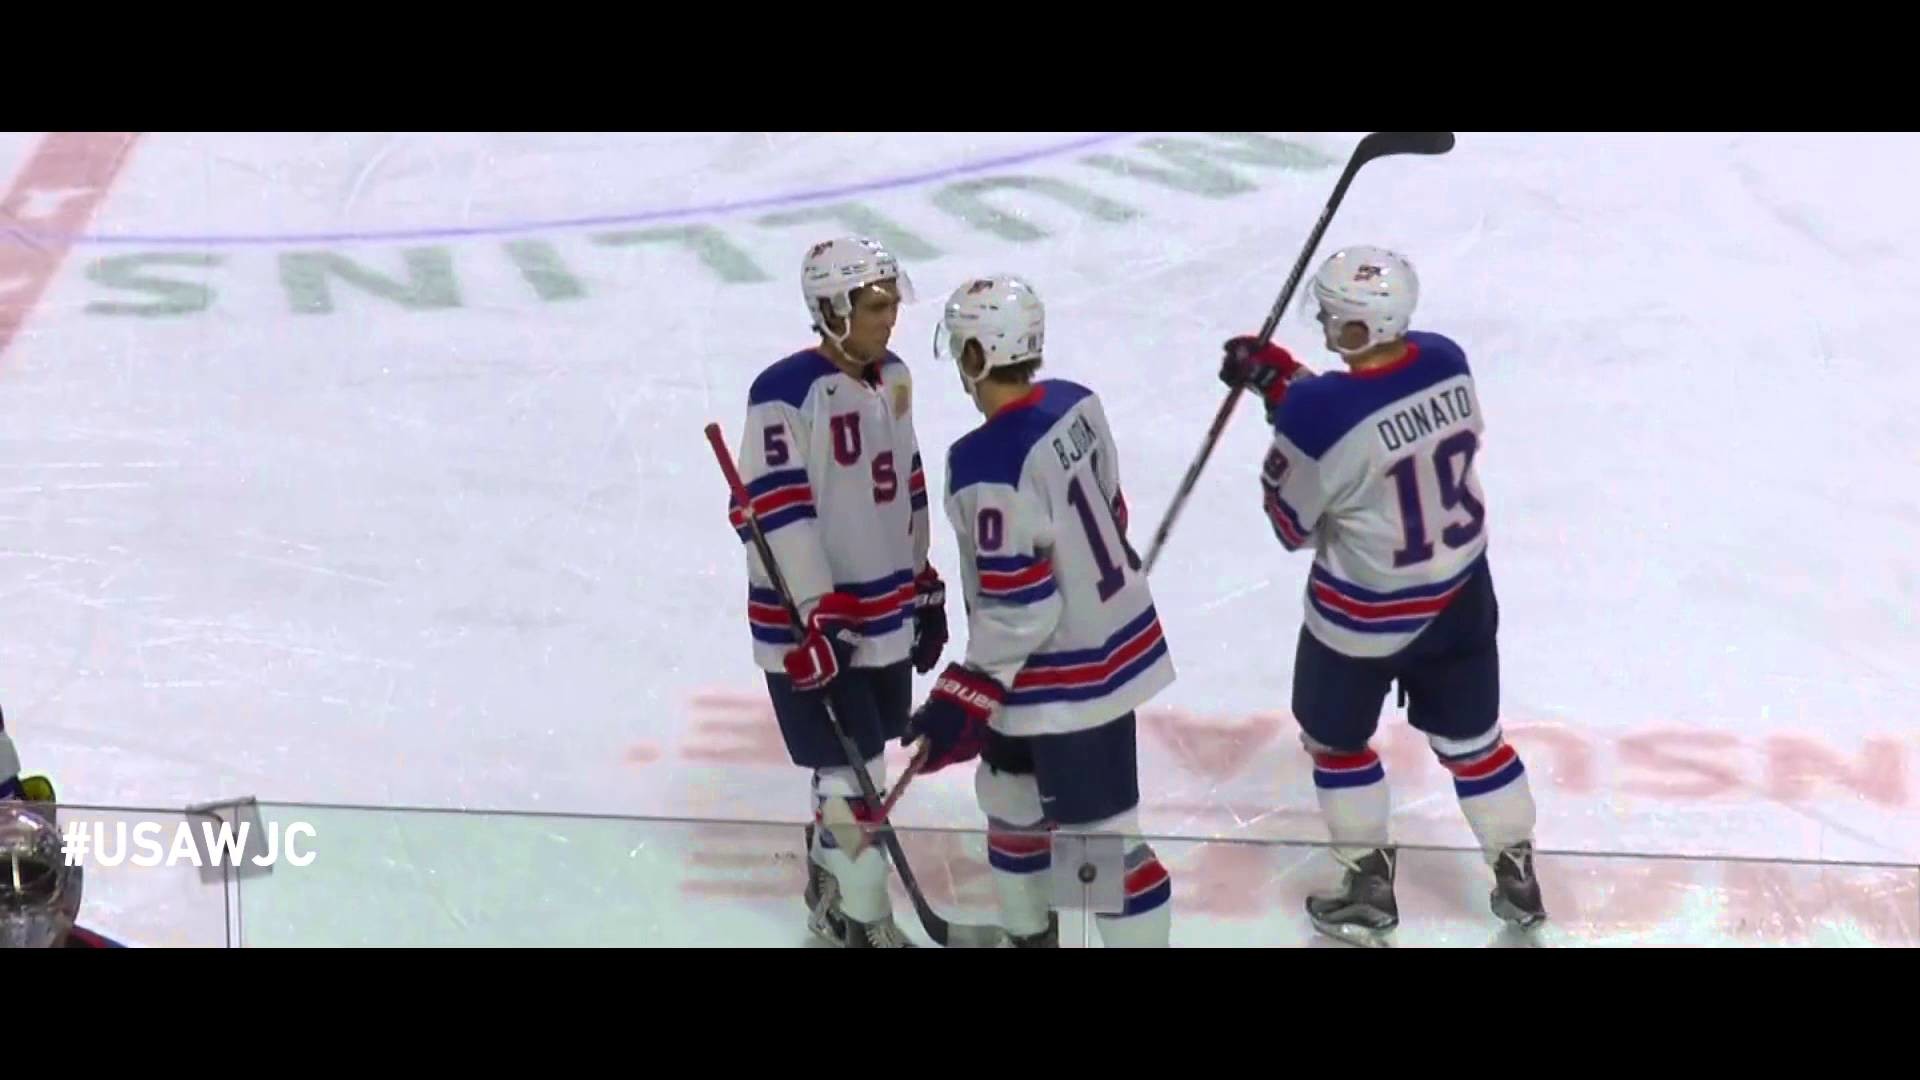 1920x1080 USA Hockey All-Access: Stars and Stripes. Episode 1: Boston Camp